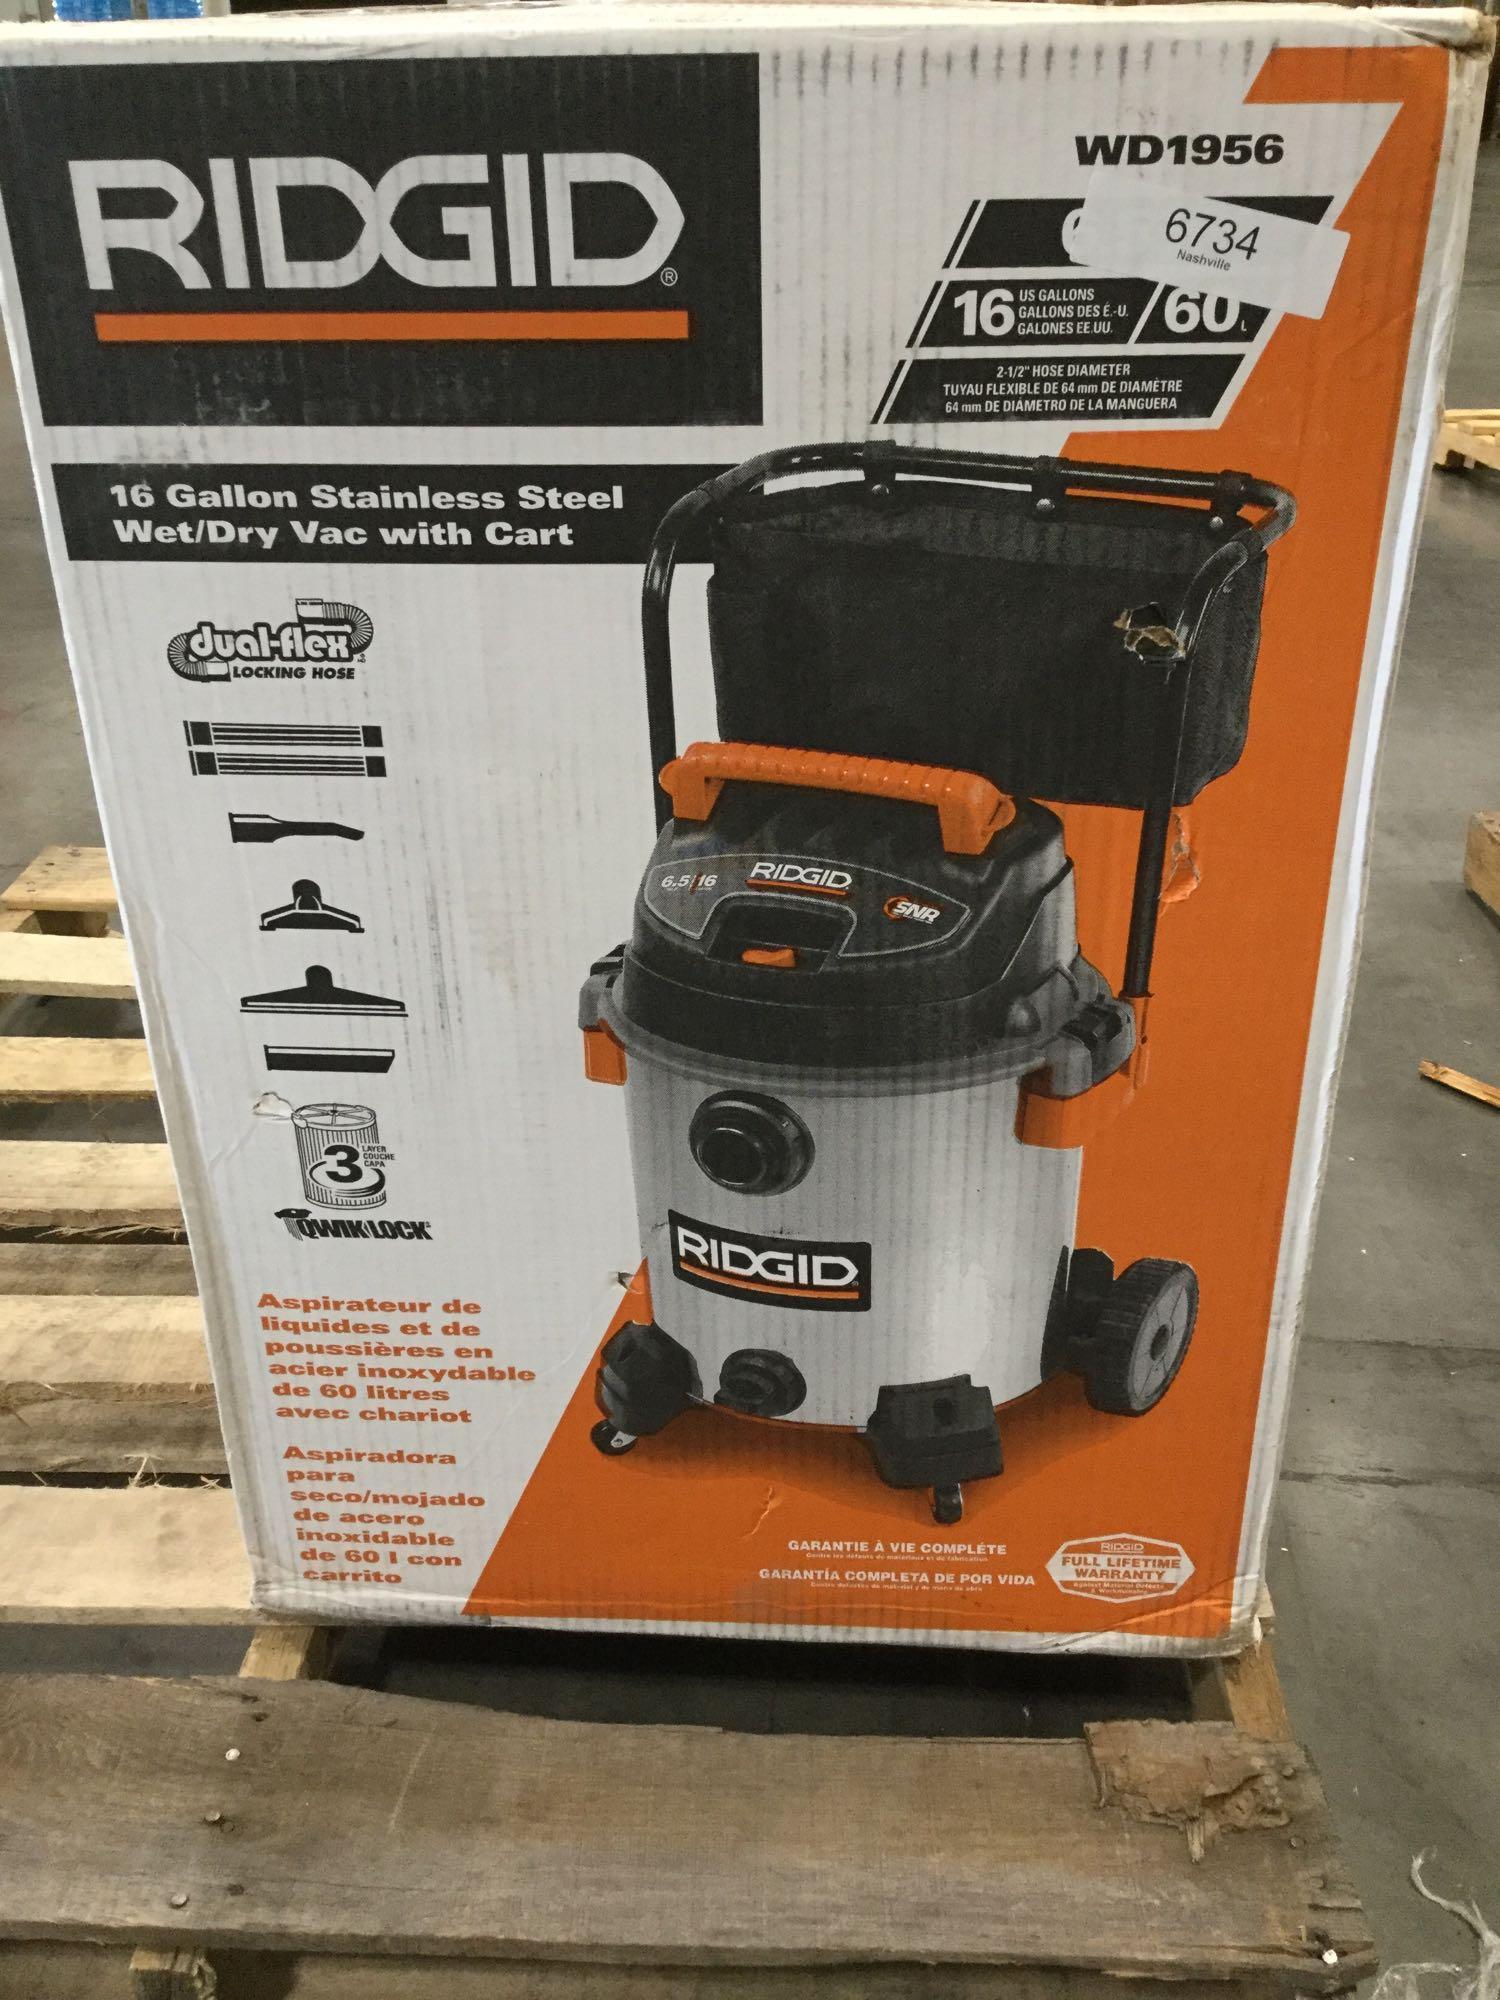 Ridgid 50353 1610RV Stainless Steel Wet Dry Vacuum, 16-Gallon Shop Vacuum with Cart $196.79 MSRP